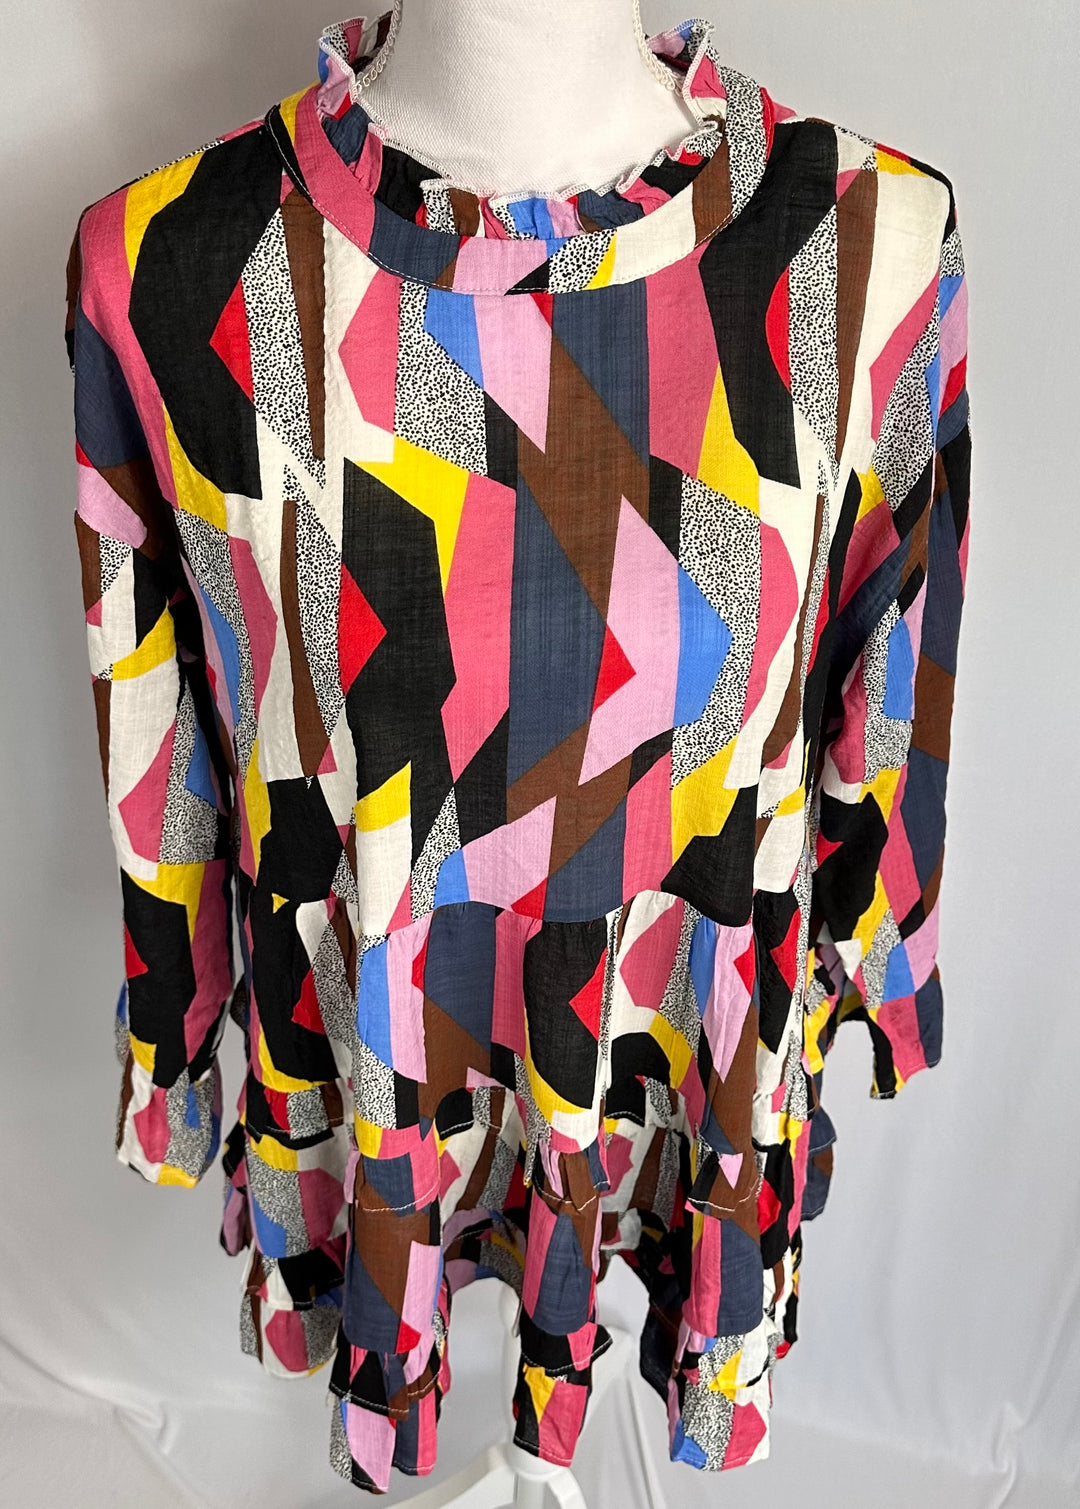 Erin Geometric Colorful Tiered Modest Top